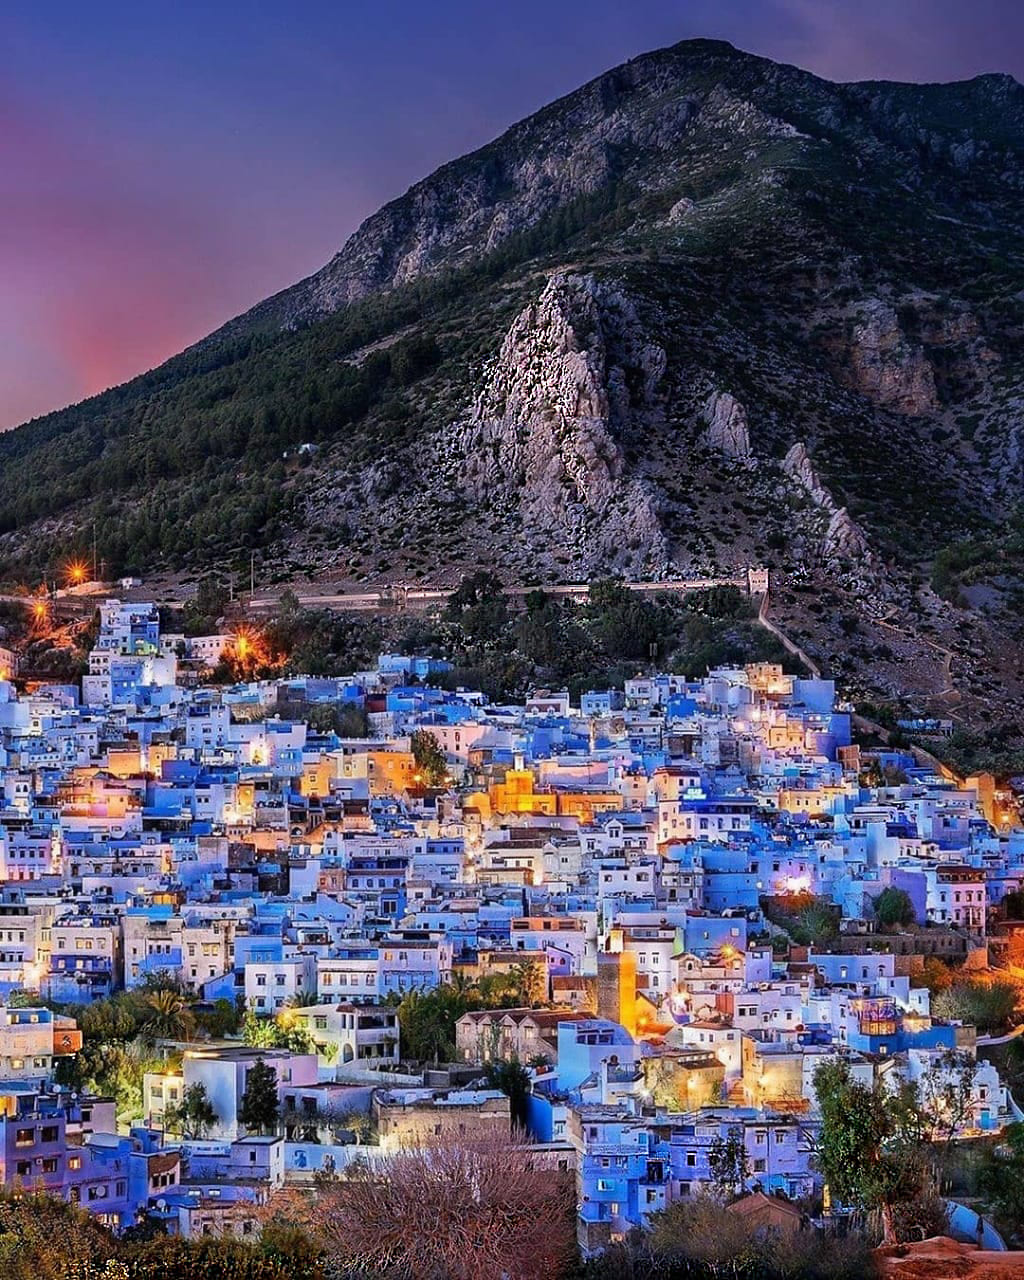 Chefchaouen, 10 days trip in Morocco